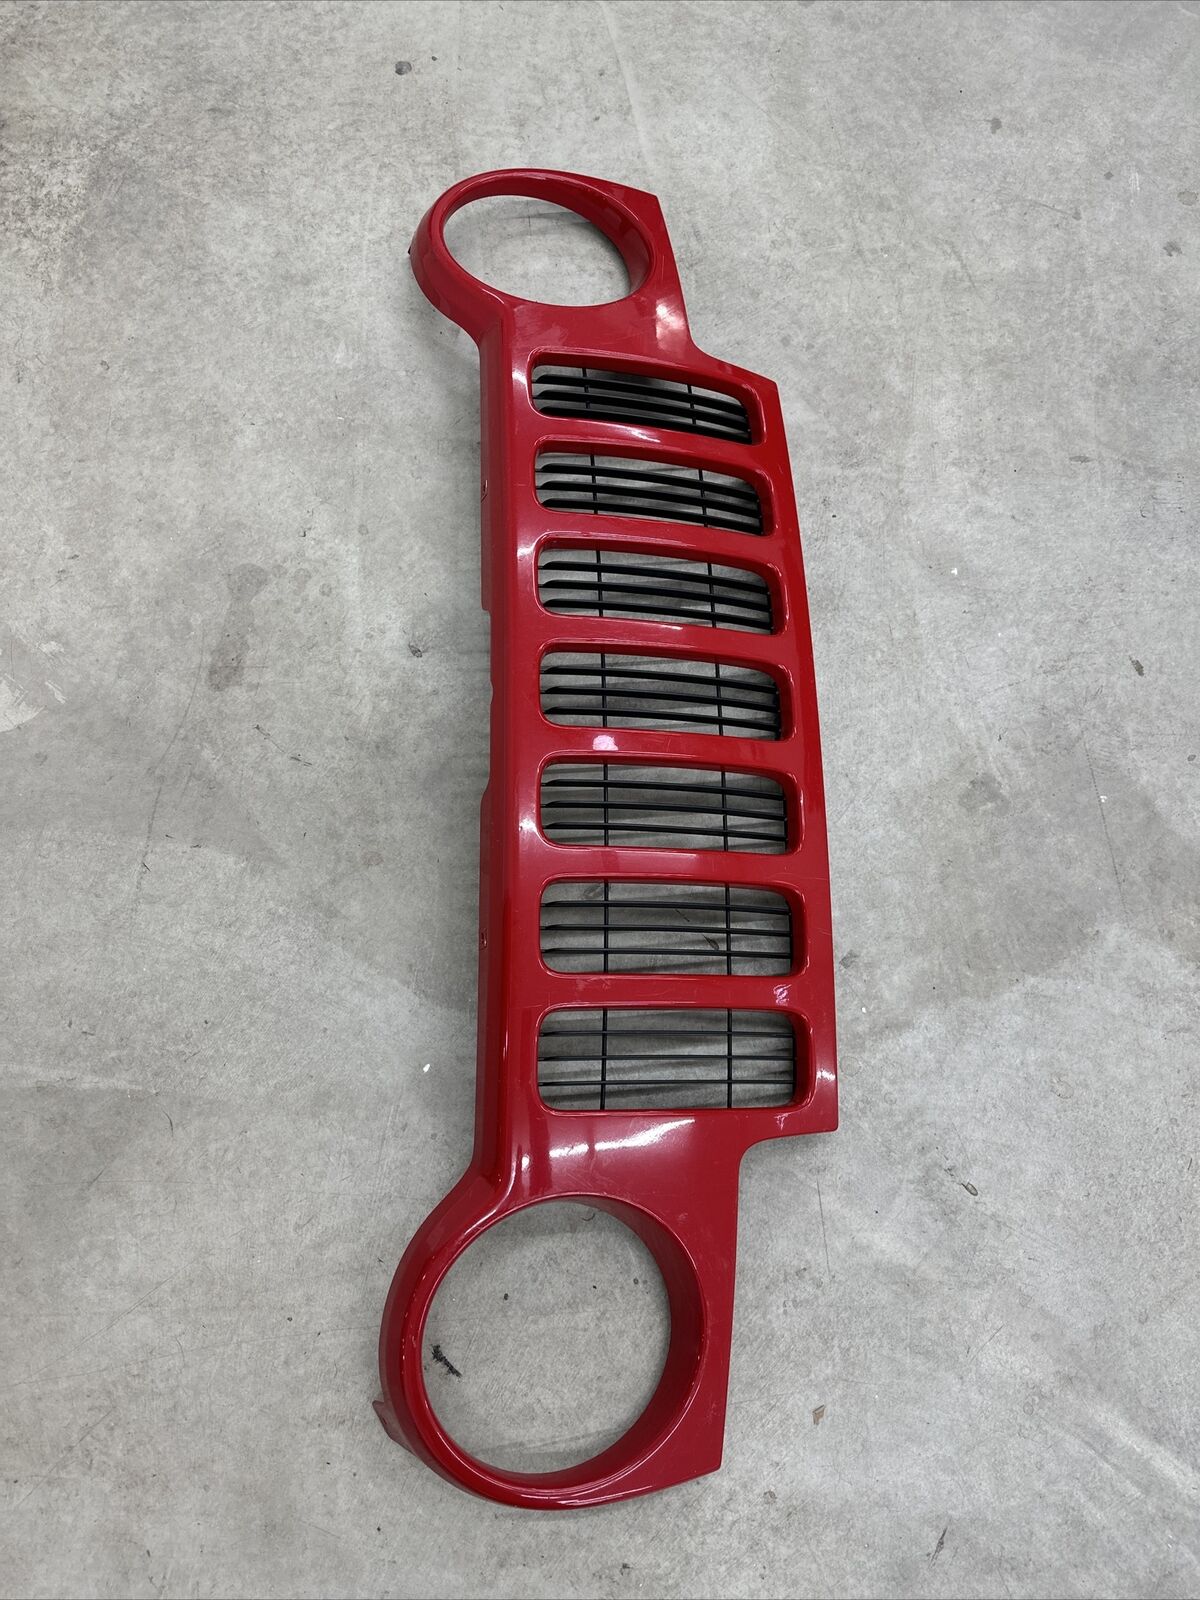 02-04 Jeep Liberty Front End Header Panel Radiator Grille PR4 OEM Red Nice